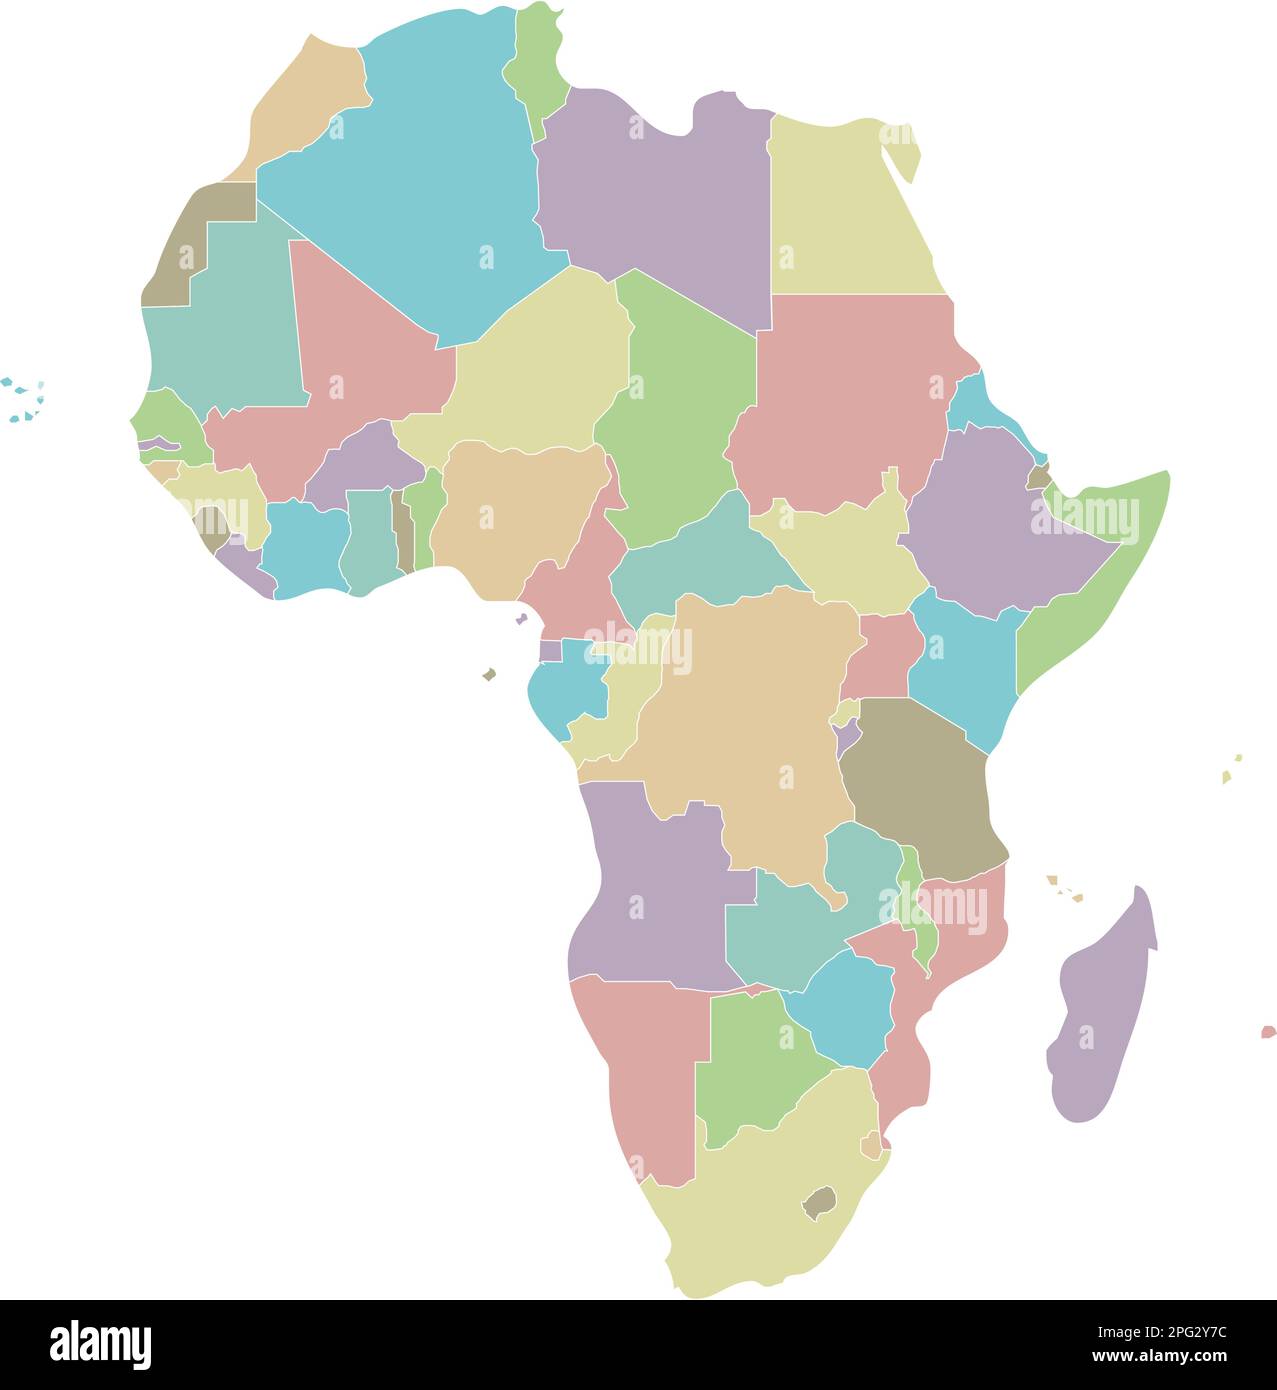 Political Blank Africa Map Vector Illustration Isolated On White Background Editable And 3781